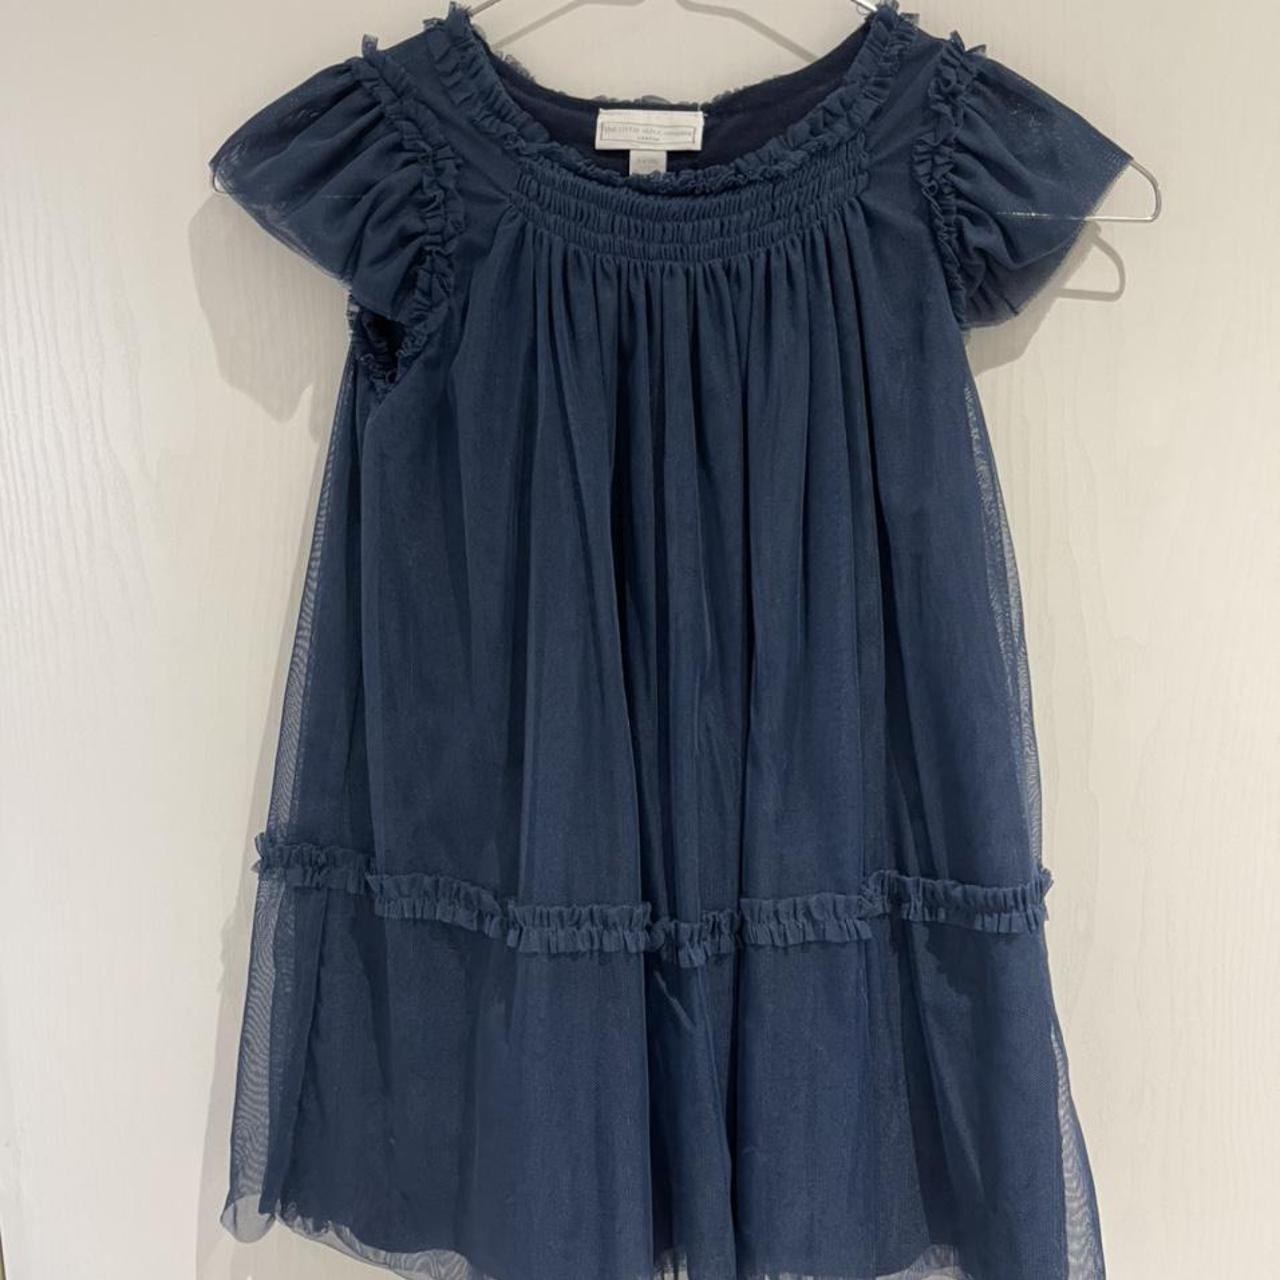 White company children dress. Size 3-4 years, could... - Depop